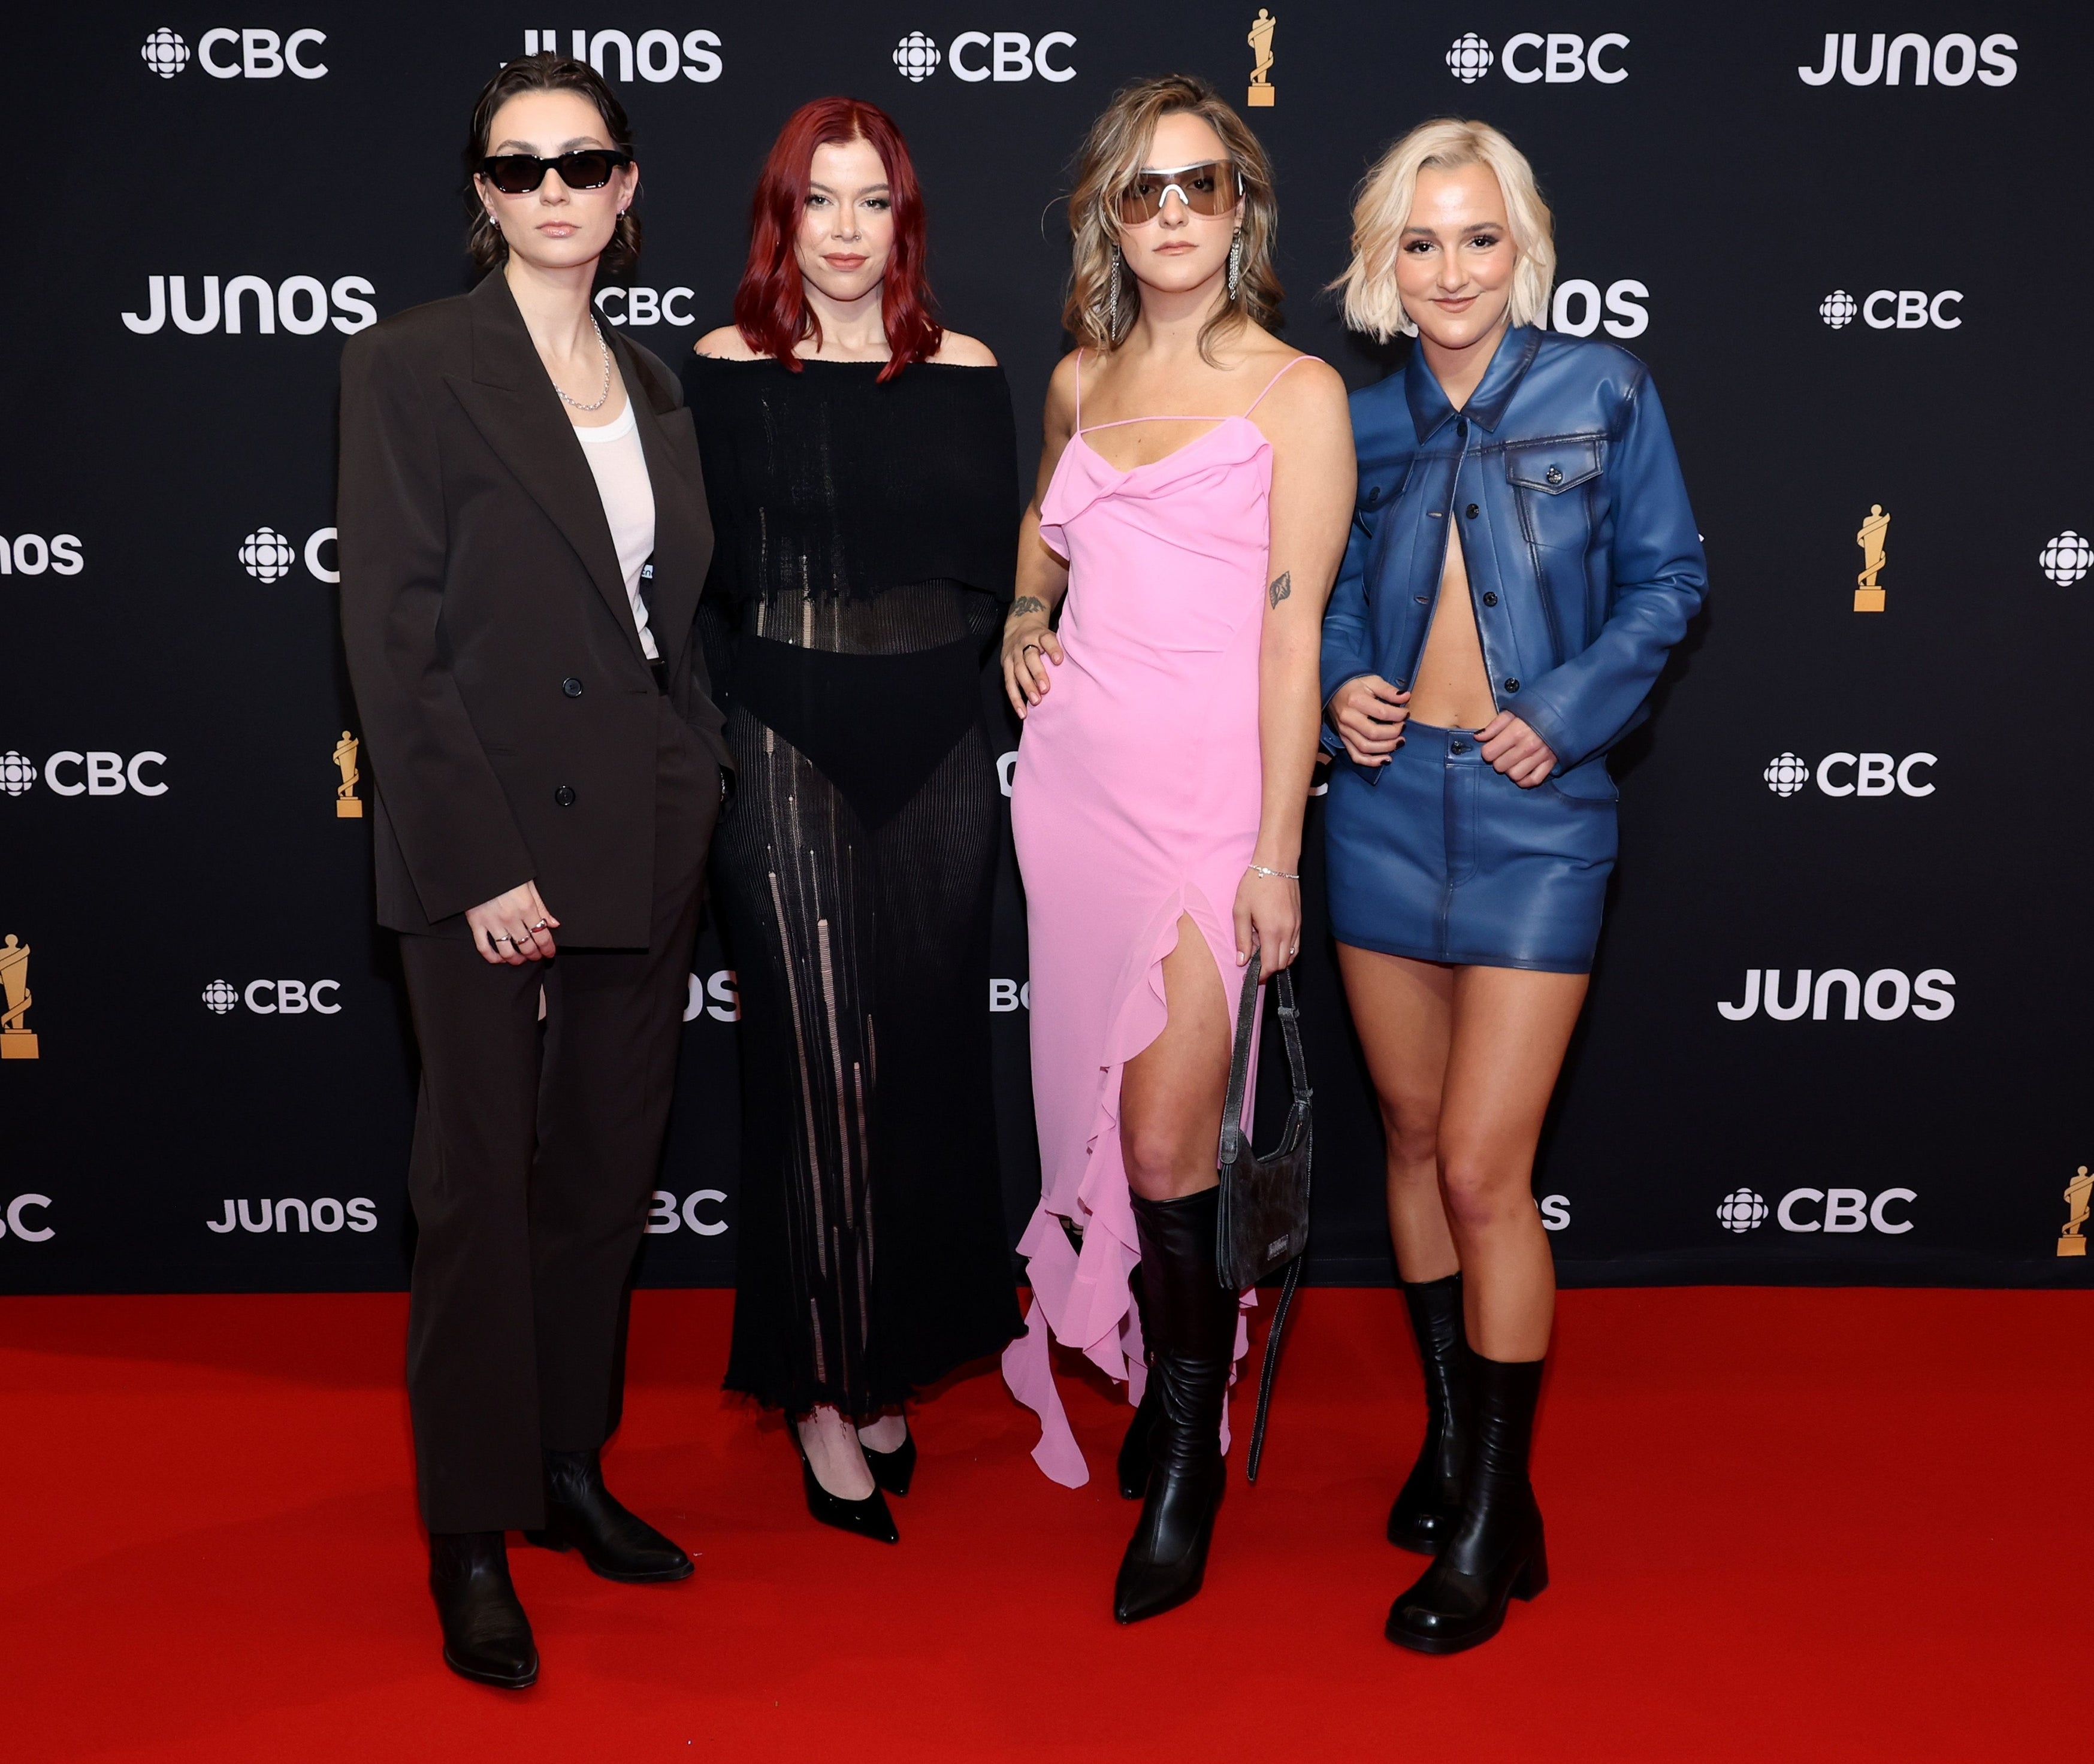 Four women posing at an event, dressed in stylish attire ranging from suits to dresses